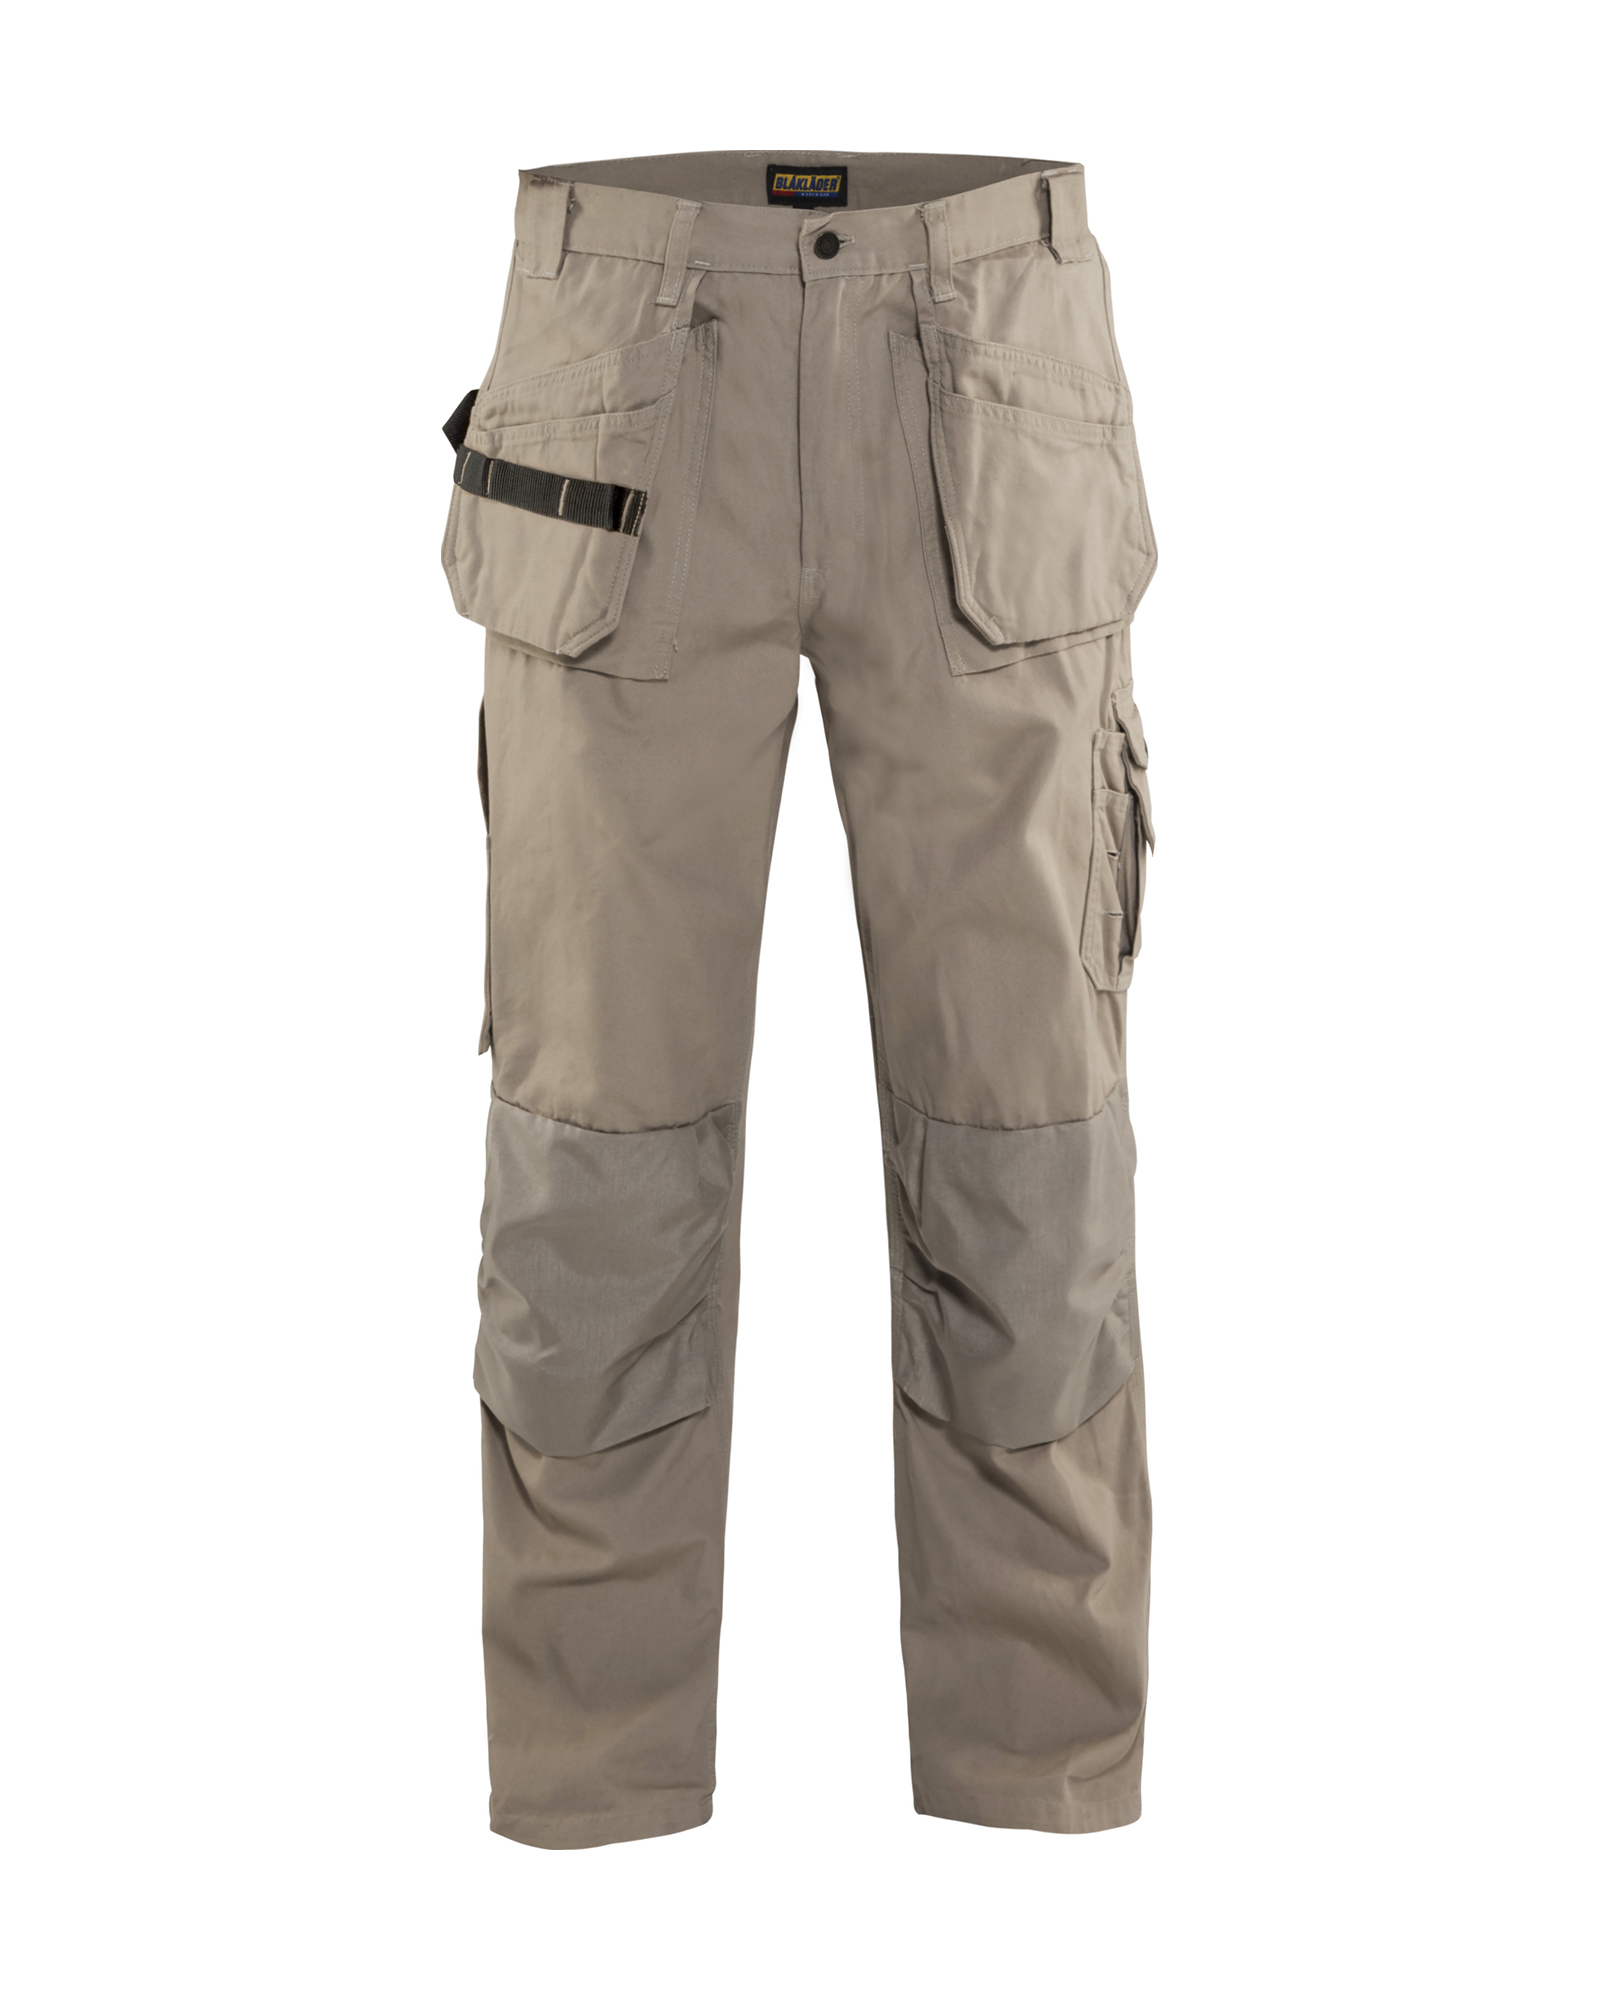 Blaklader Lightweight Cargo Combat Work Trousers with Multi Pockets 1409 